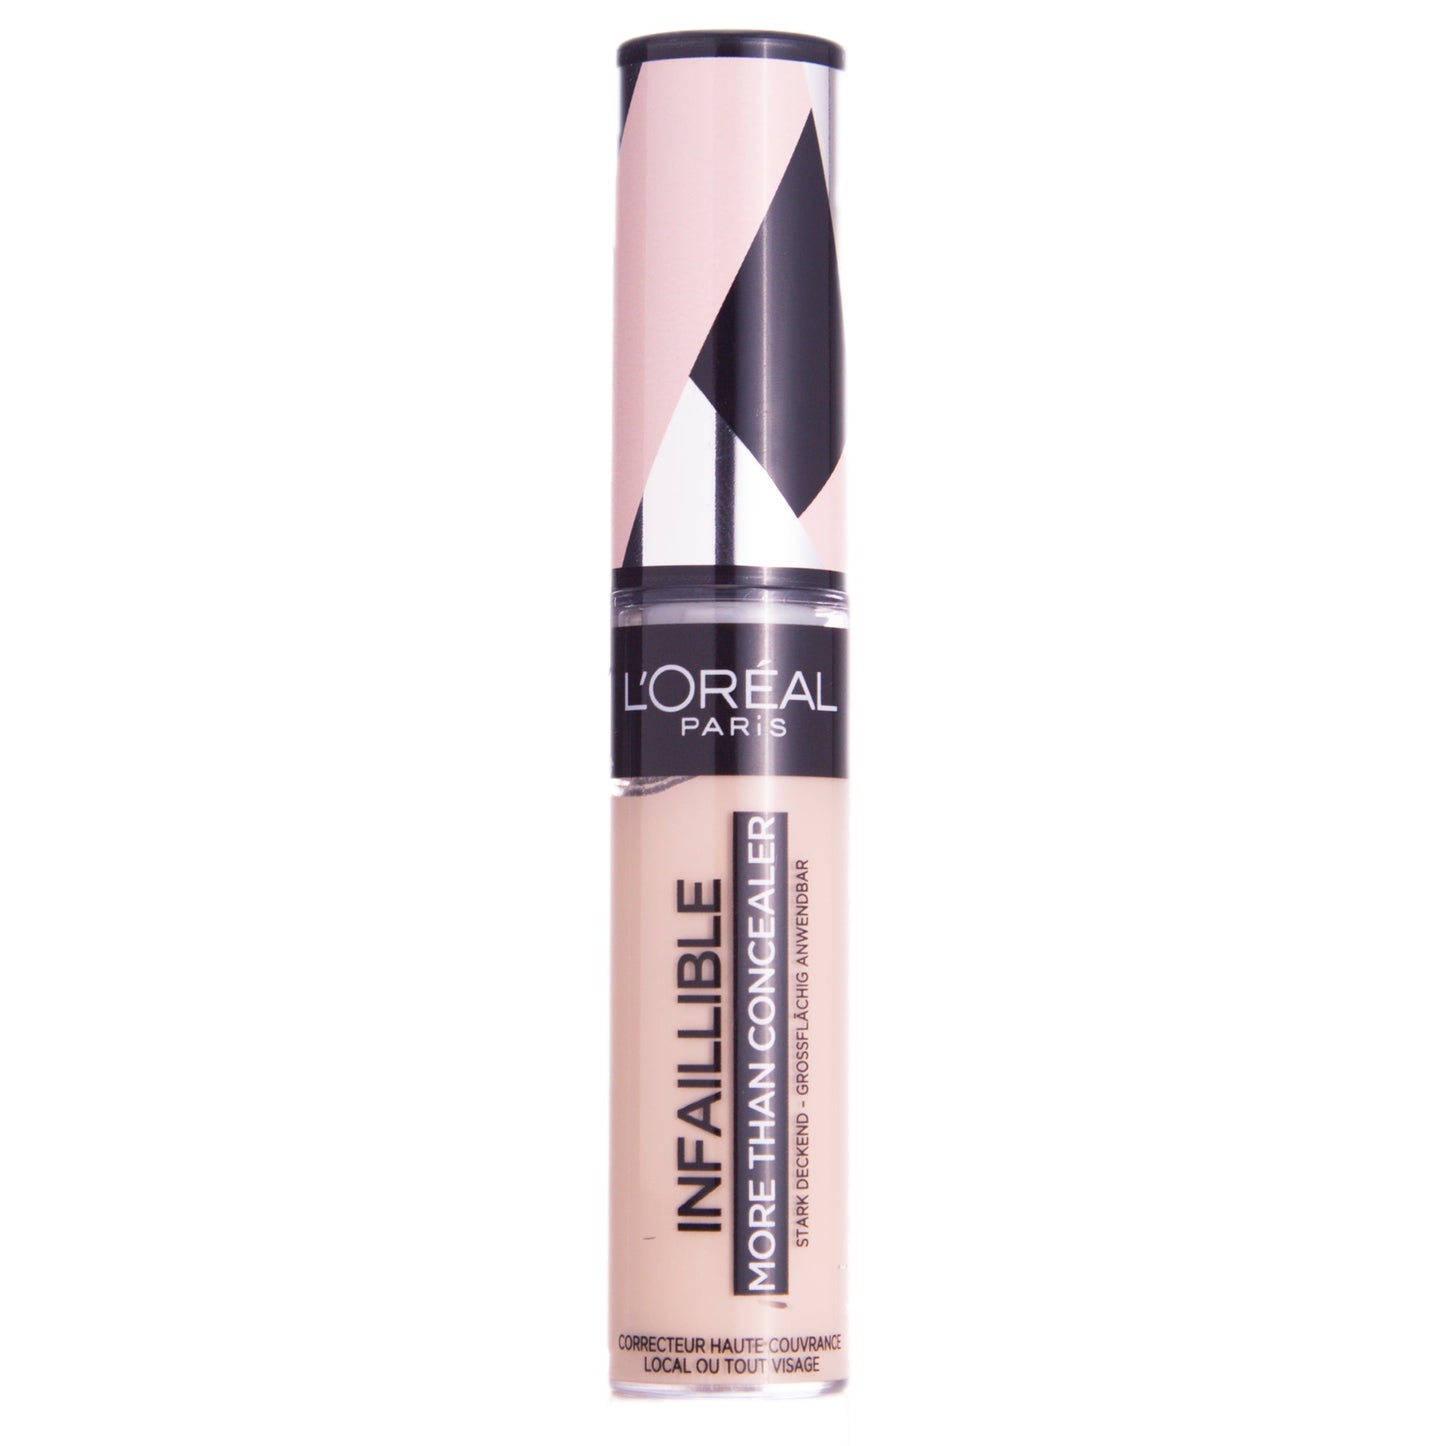 L'Oreal Paris Infallible More Than Concealer - 321 Egg Shell